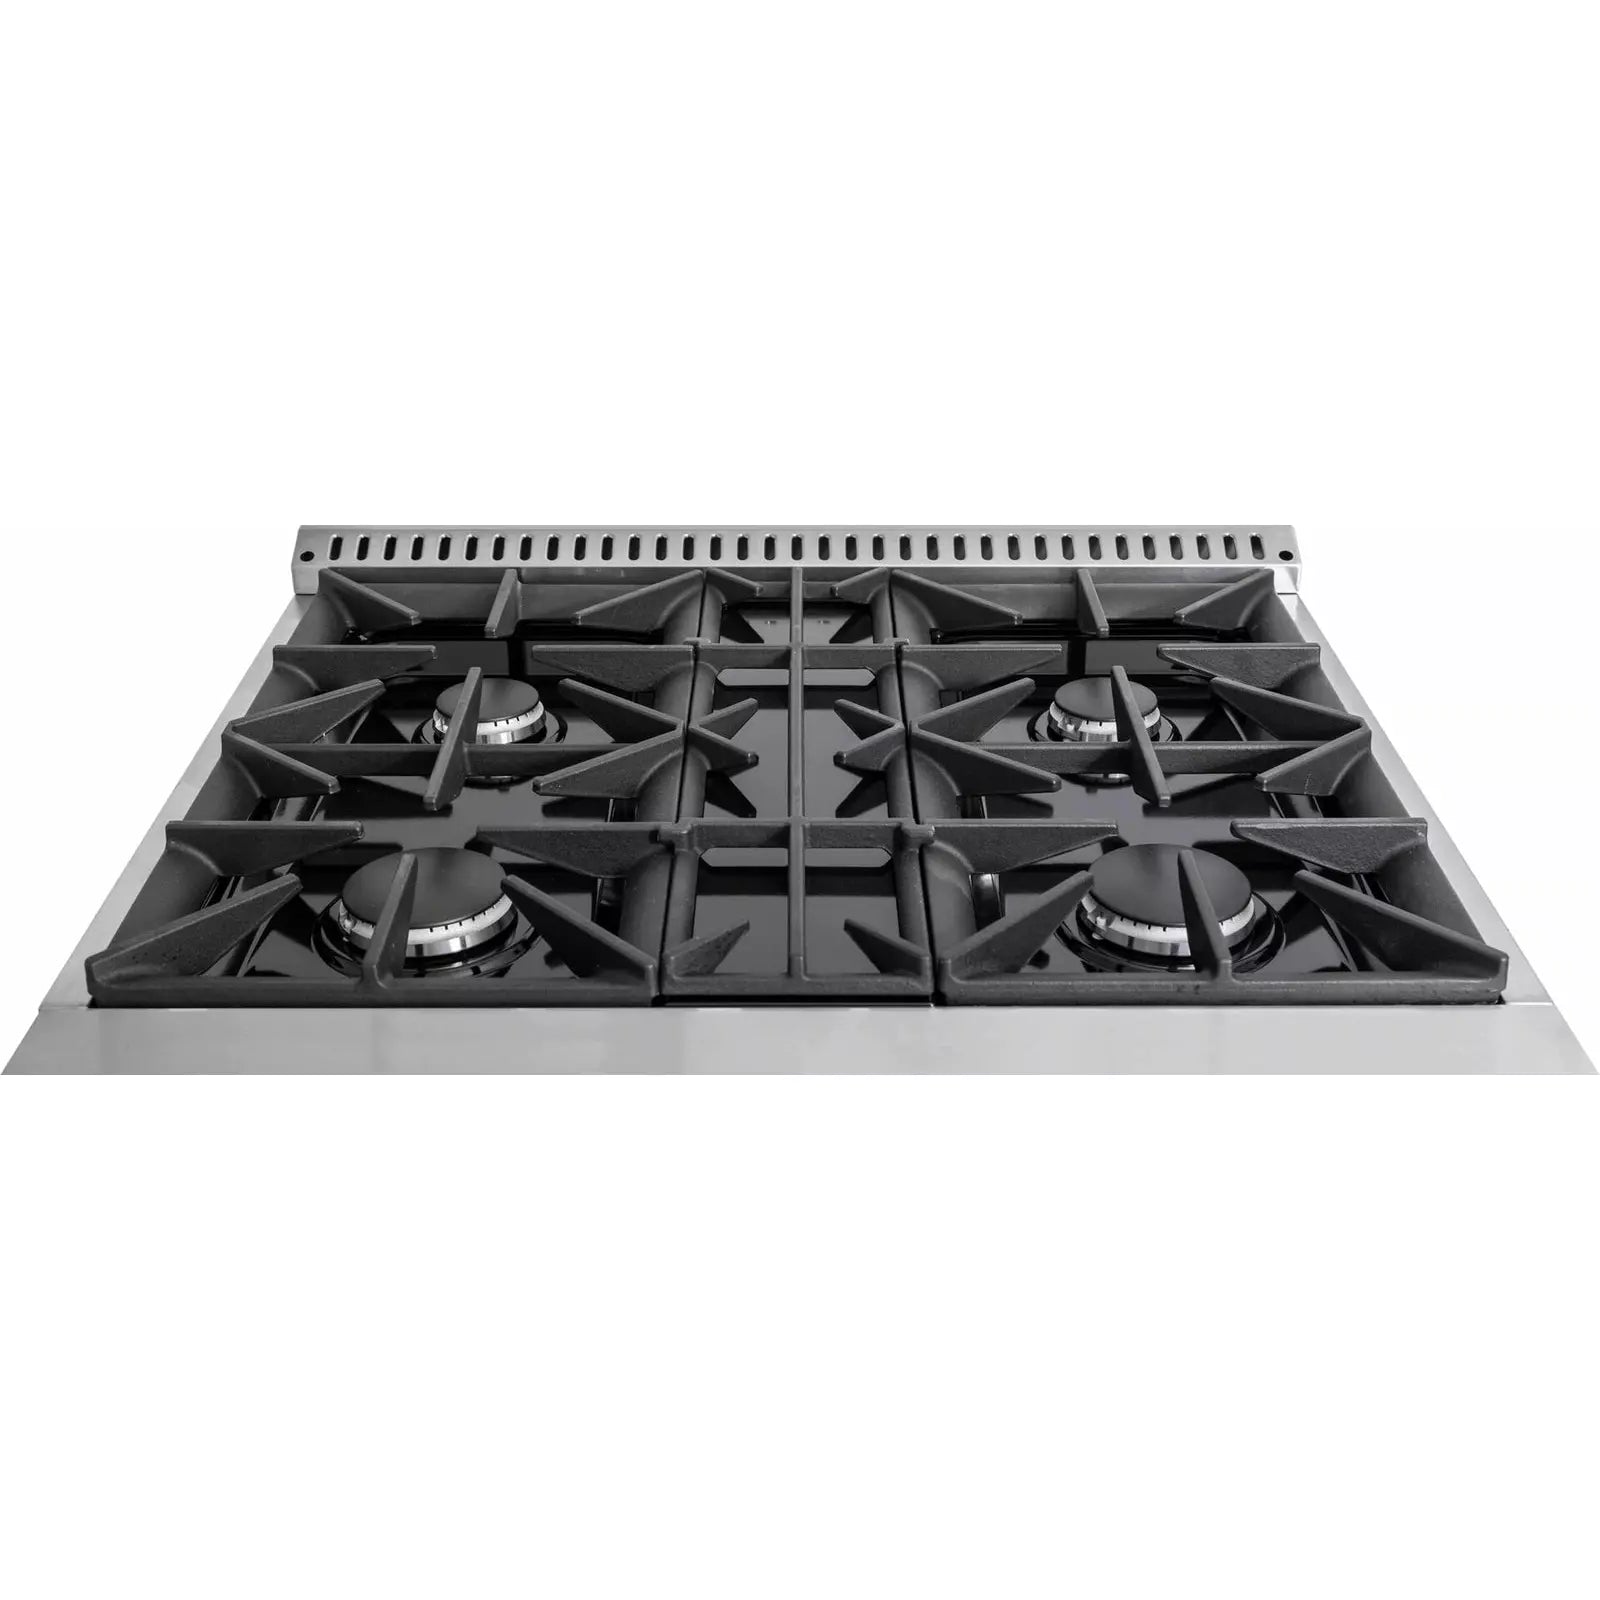 Forte 30" Freestanding All Gas Range - 4 Sealed Italian Made Burners, 3.53 cu. ft. Oven, Easy Glide Oven Racks - in Stainless Steel with Black Door And Black Knob (FGR304BBB2)